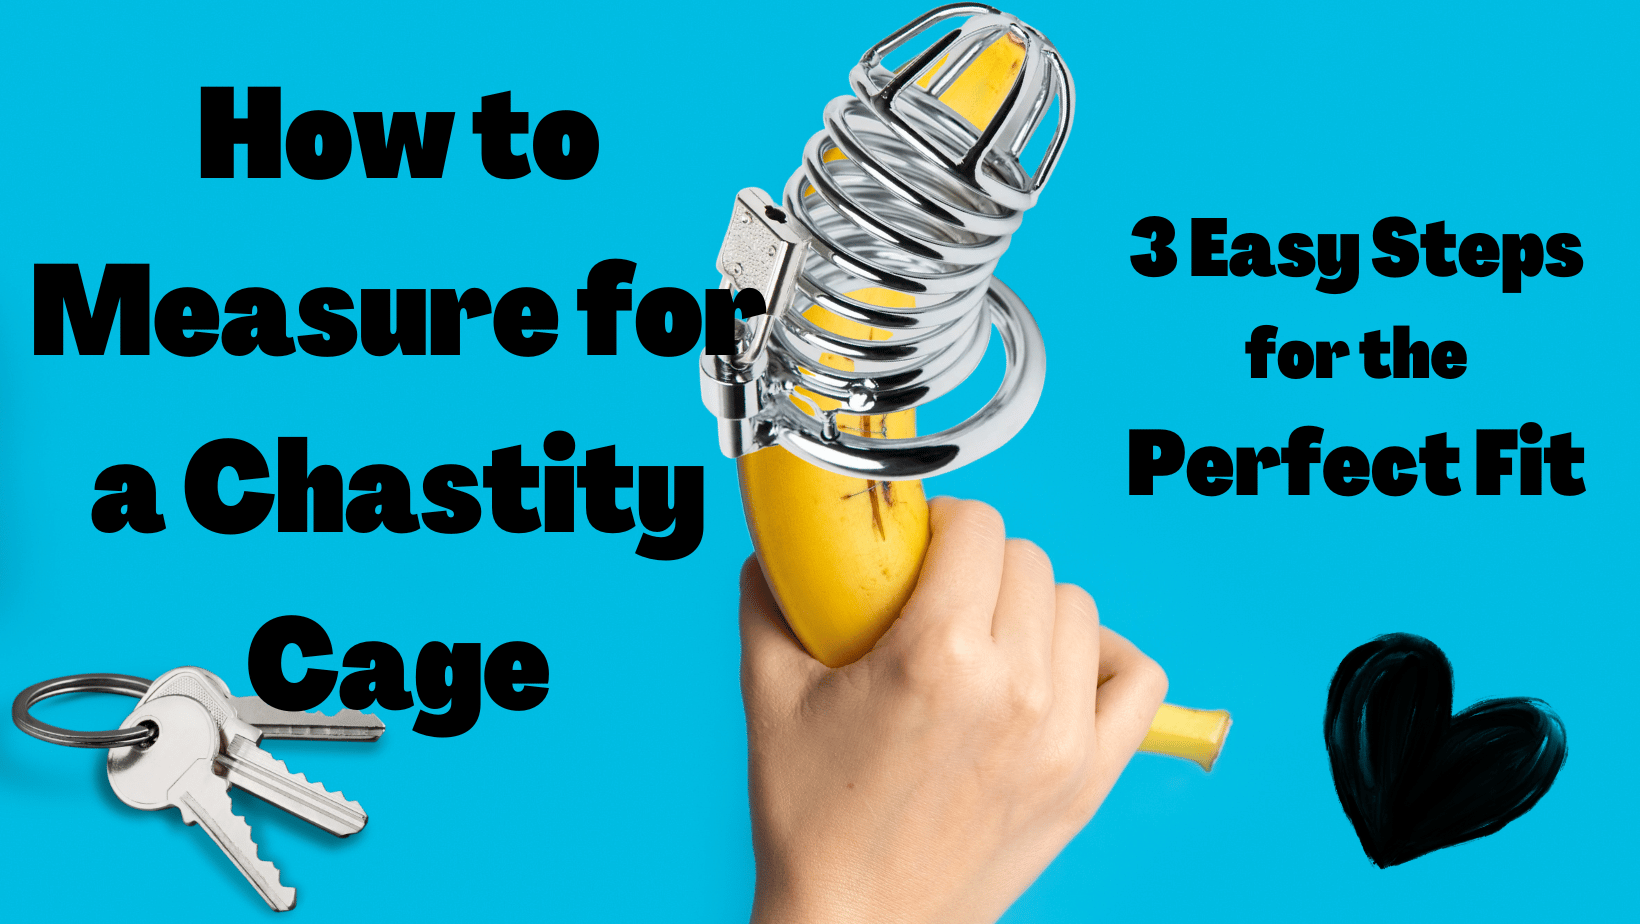 How to Measure for a Chastity Cage